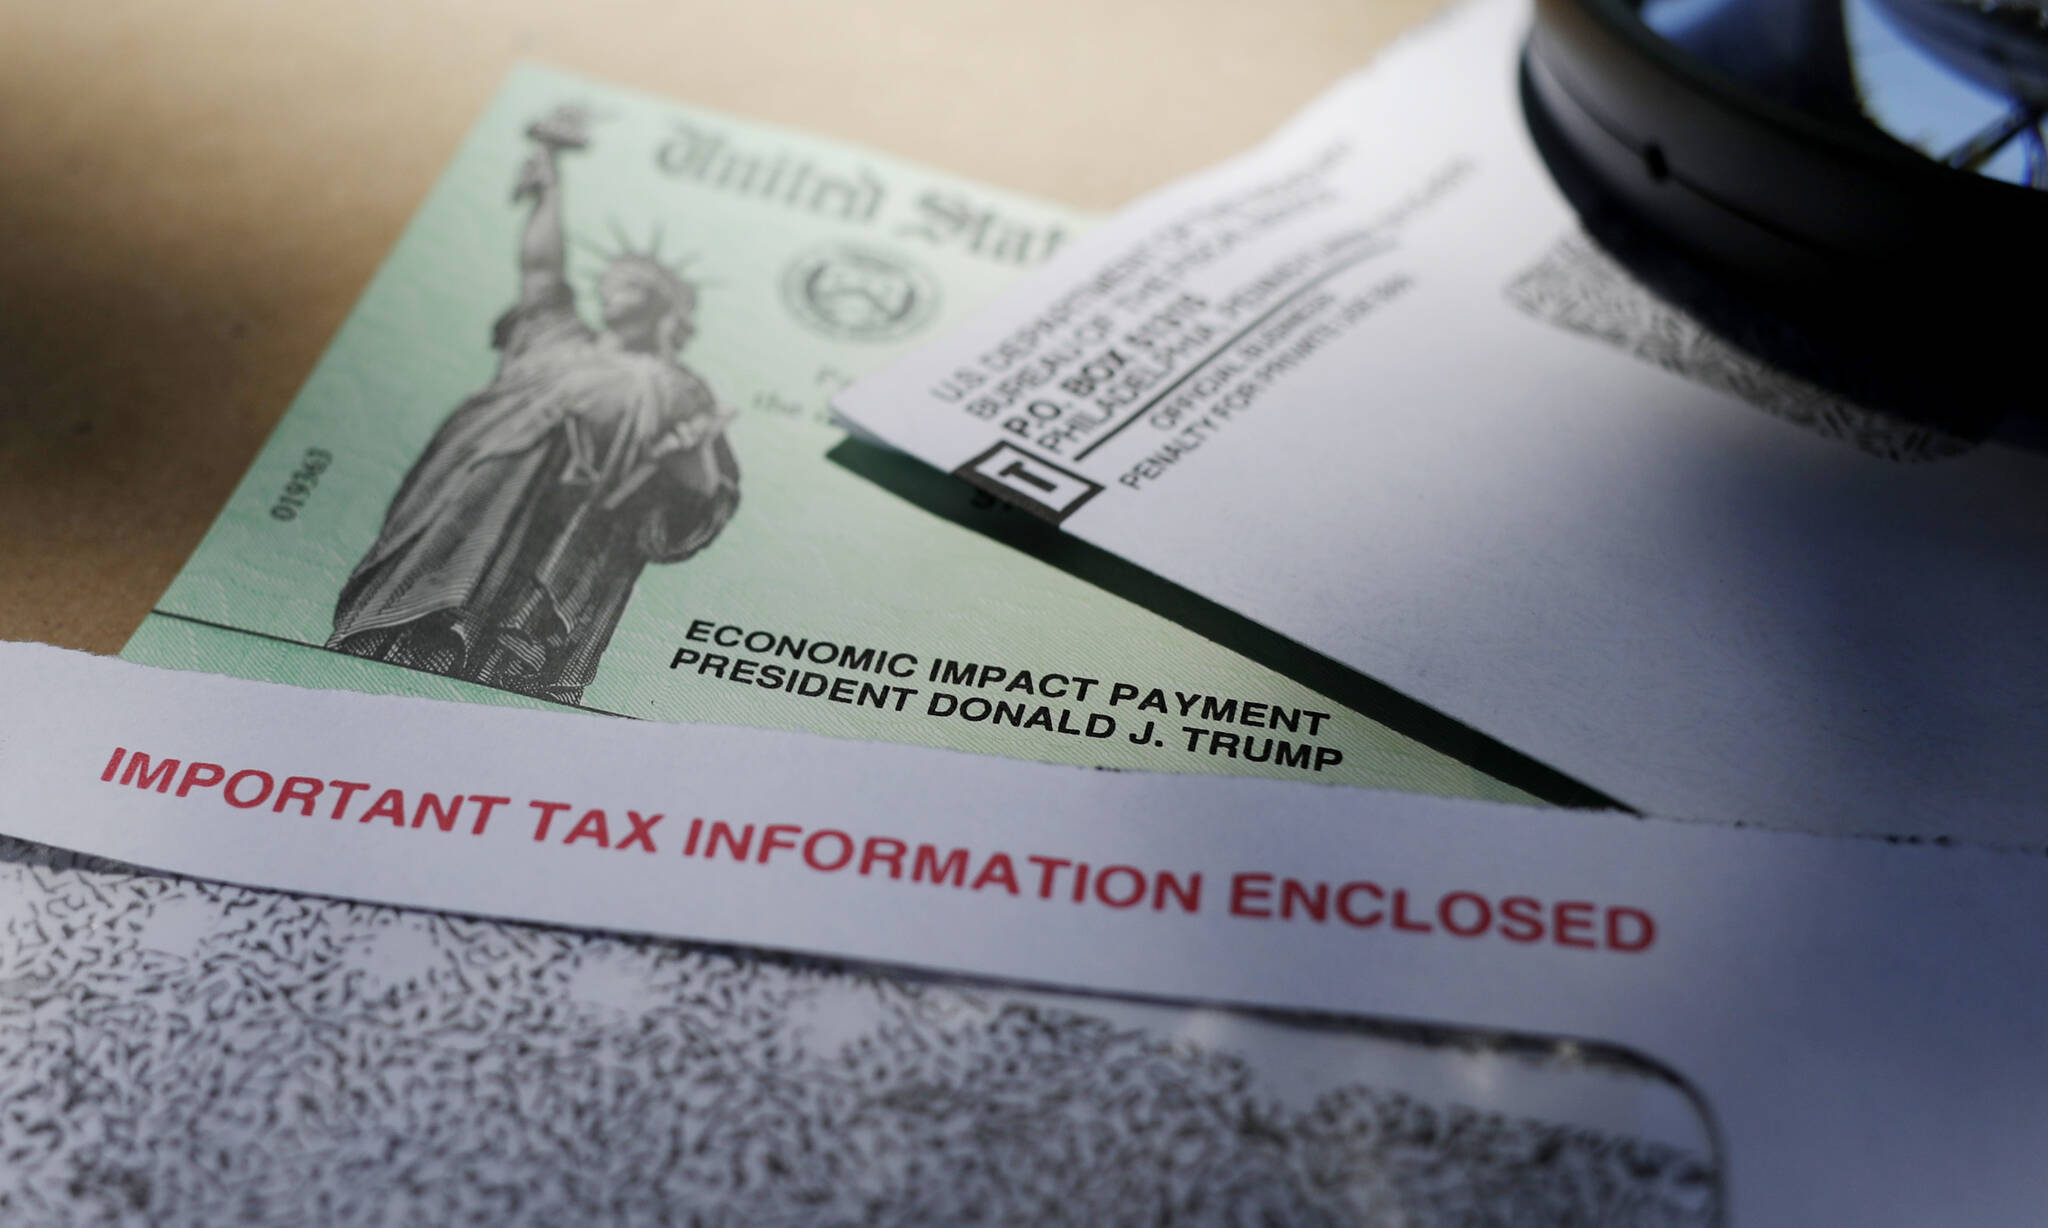 President Donald Trump’s name is seen on a stimulus check issued by the IRS to help combat the adverse economic effects of the COVID-19 outbreak, on April 23, 2020, in San Antonio. The IRS announced Friday. Feb. 10, 2023, that most relief checks issued by states last year aren’t subject to federal taxes, providing 11th hour guidance as tax returns start to pour in. (AP Photo / Eric Gay, File)